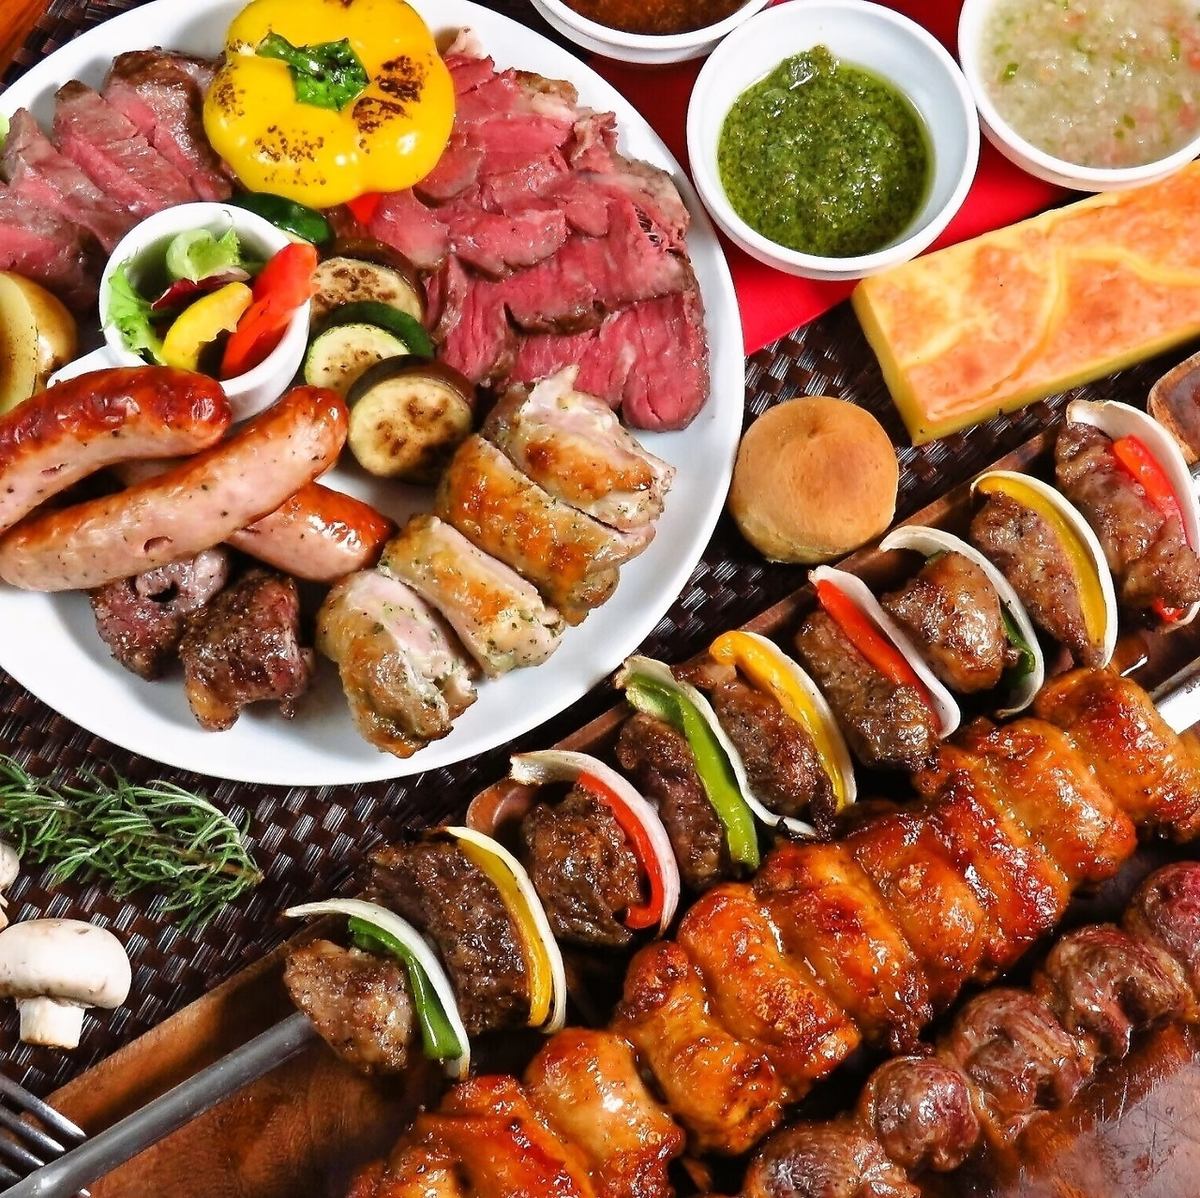 Today's dinner is decided on meat ★ Come and enjoy Churrasco at ALEGRIA ♪